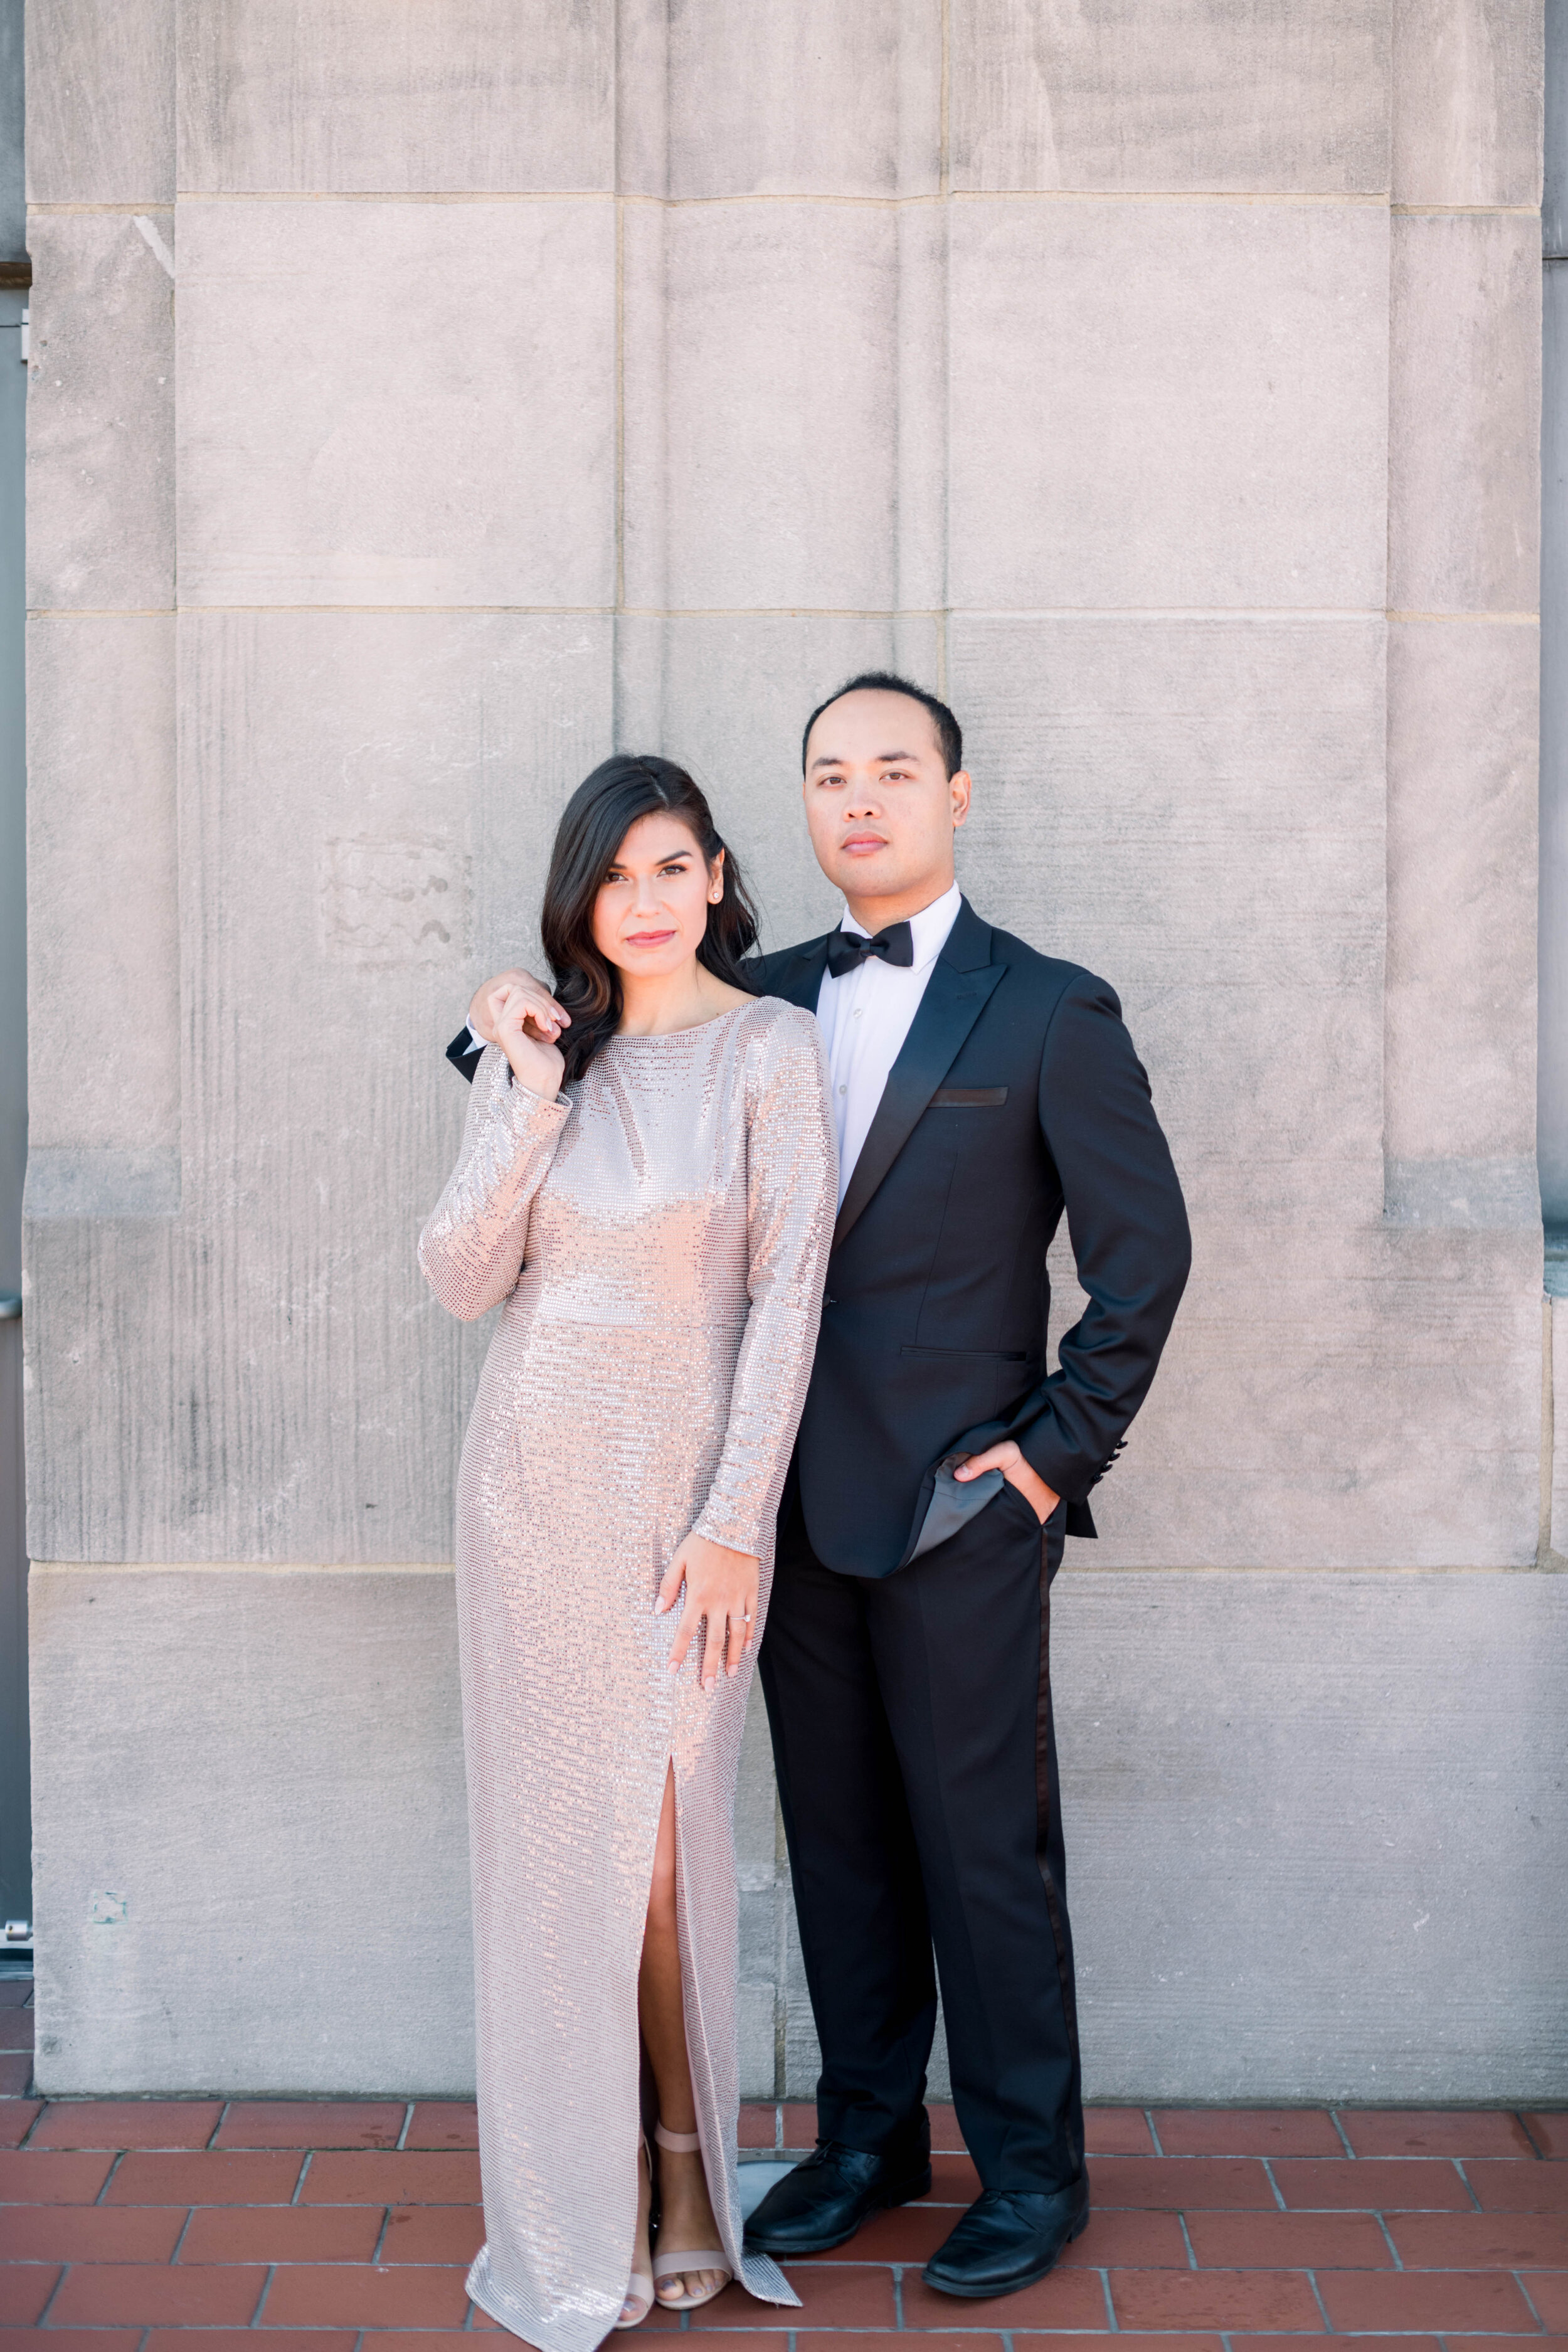 top of the rock+engagement+nyc engagement+NYC elopement+sparkly wedding gown+gold wedding gown+white bouquet+modern wedding+rockefeller center